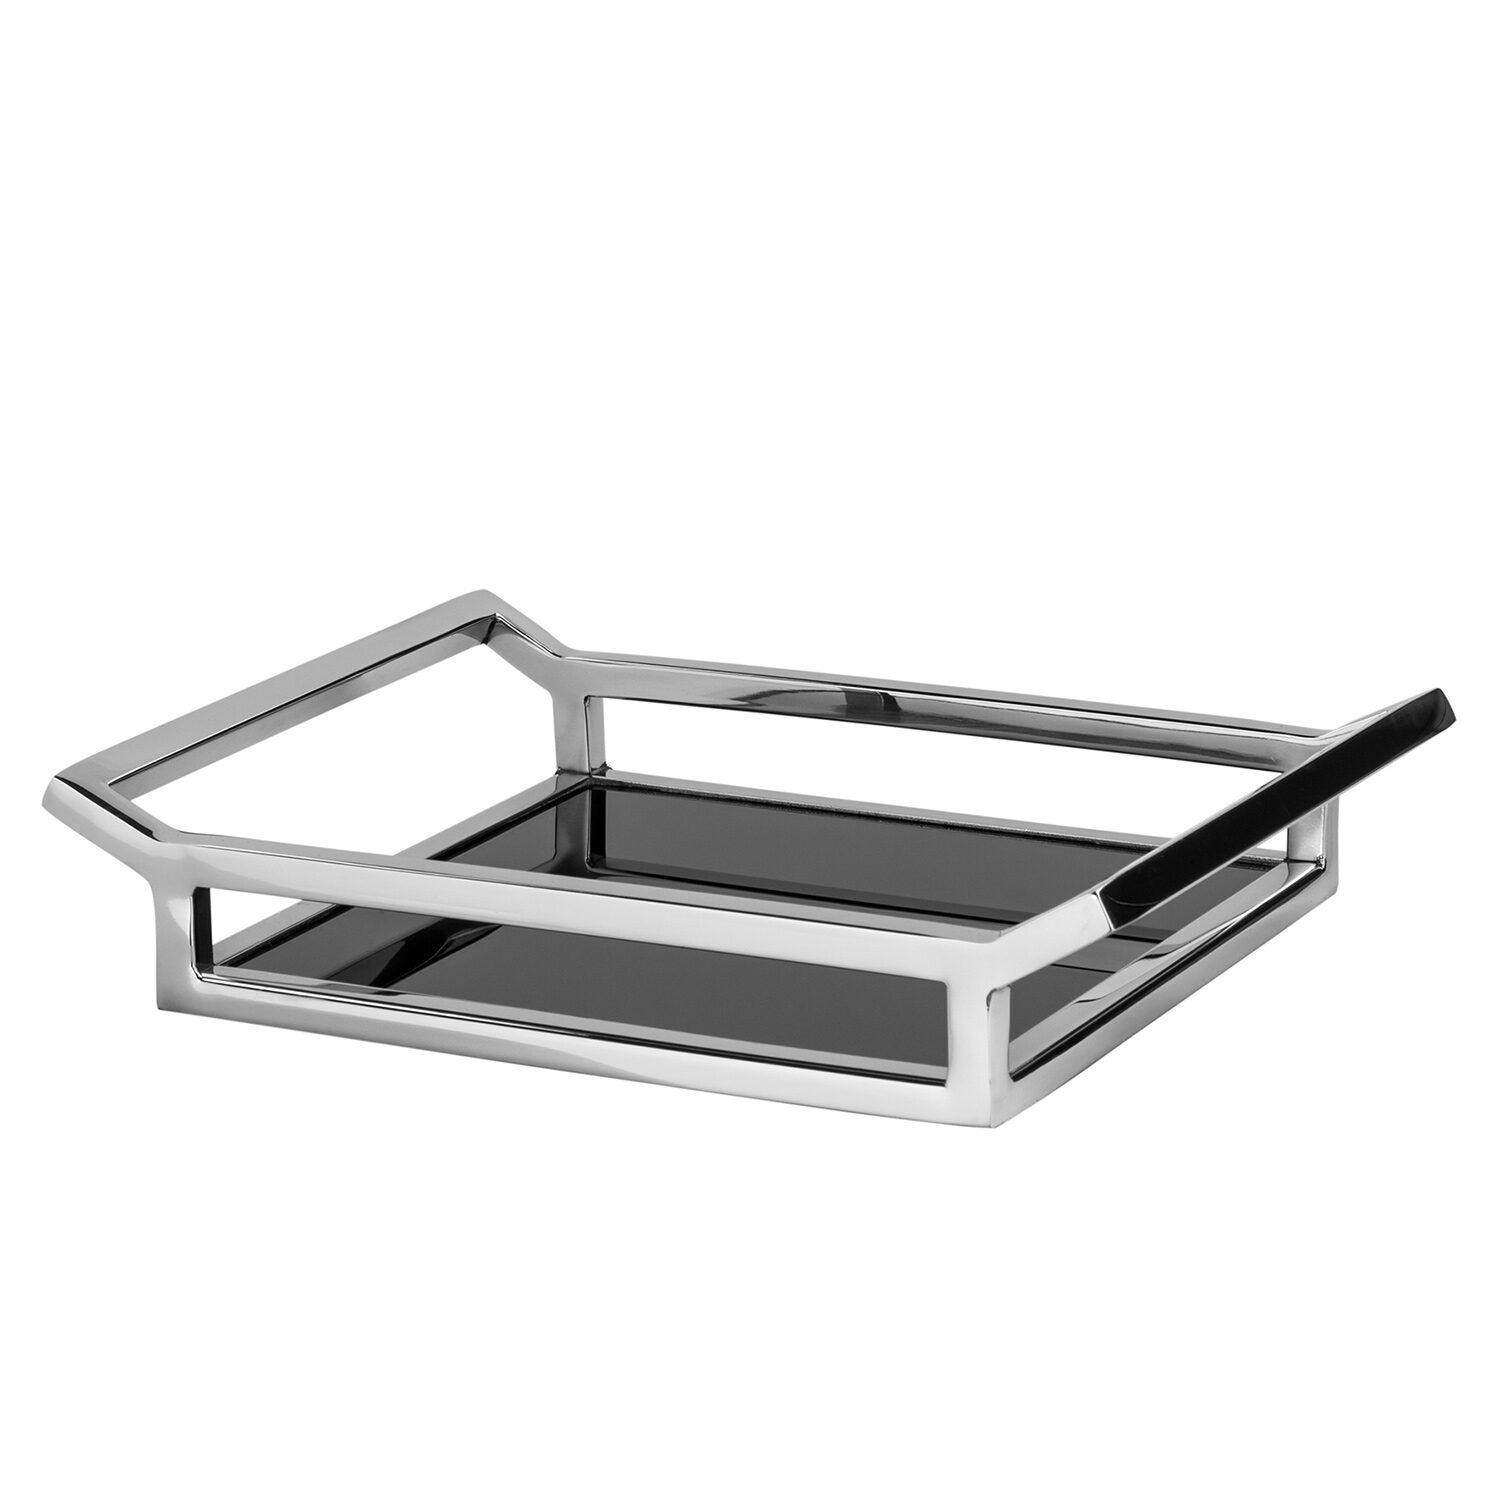 PIANO square tray, stainless steel, black glass